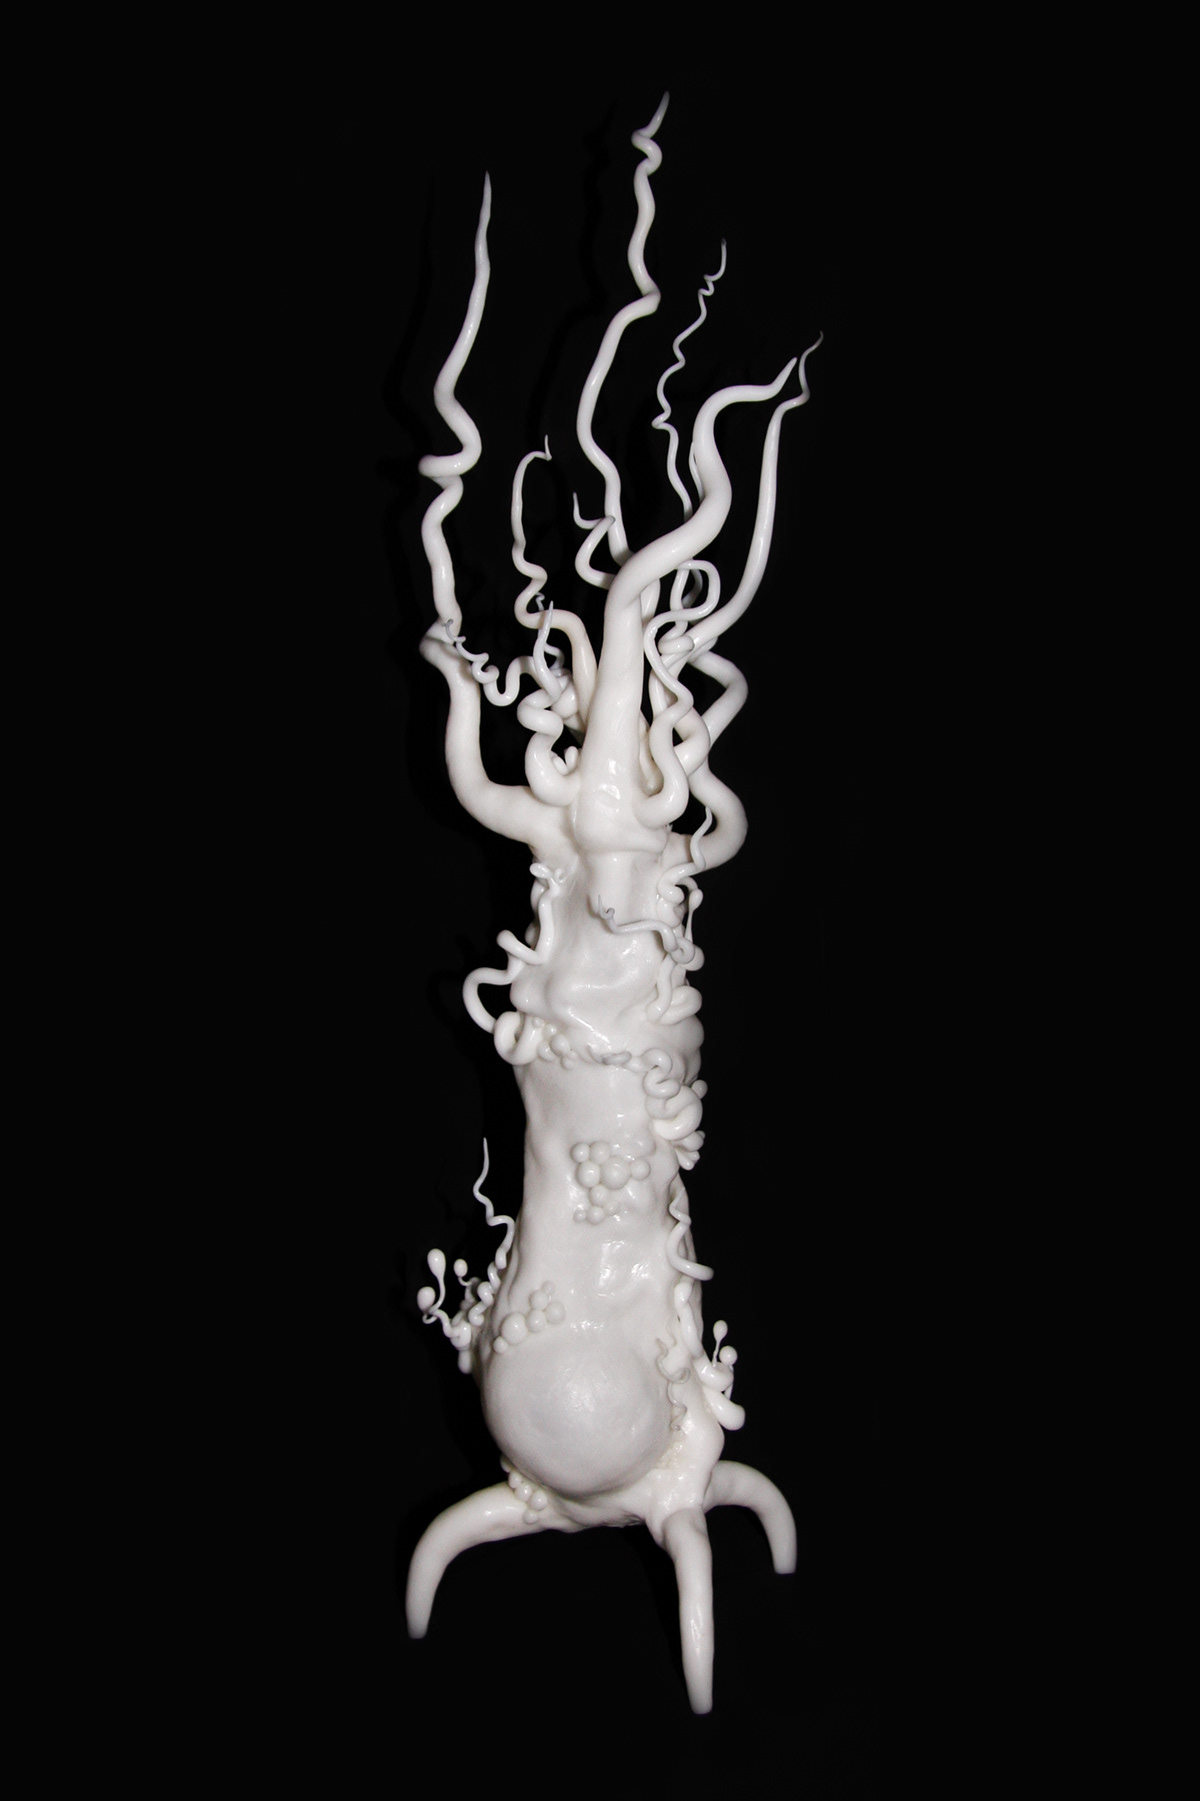 polycaprolactone  plastic  biomorphic  organic Nature  white  surreal  abstract Tendril  ornate  intricate  twisty strange  claire jackson curiosity  seeds  science